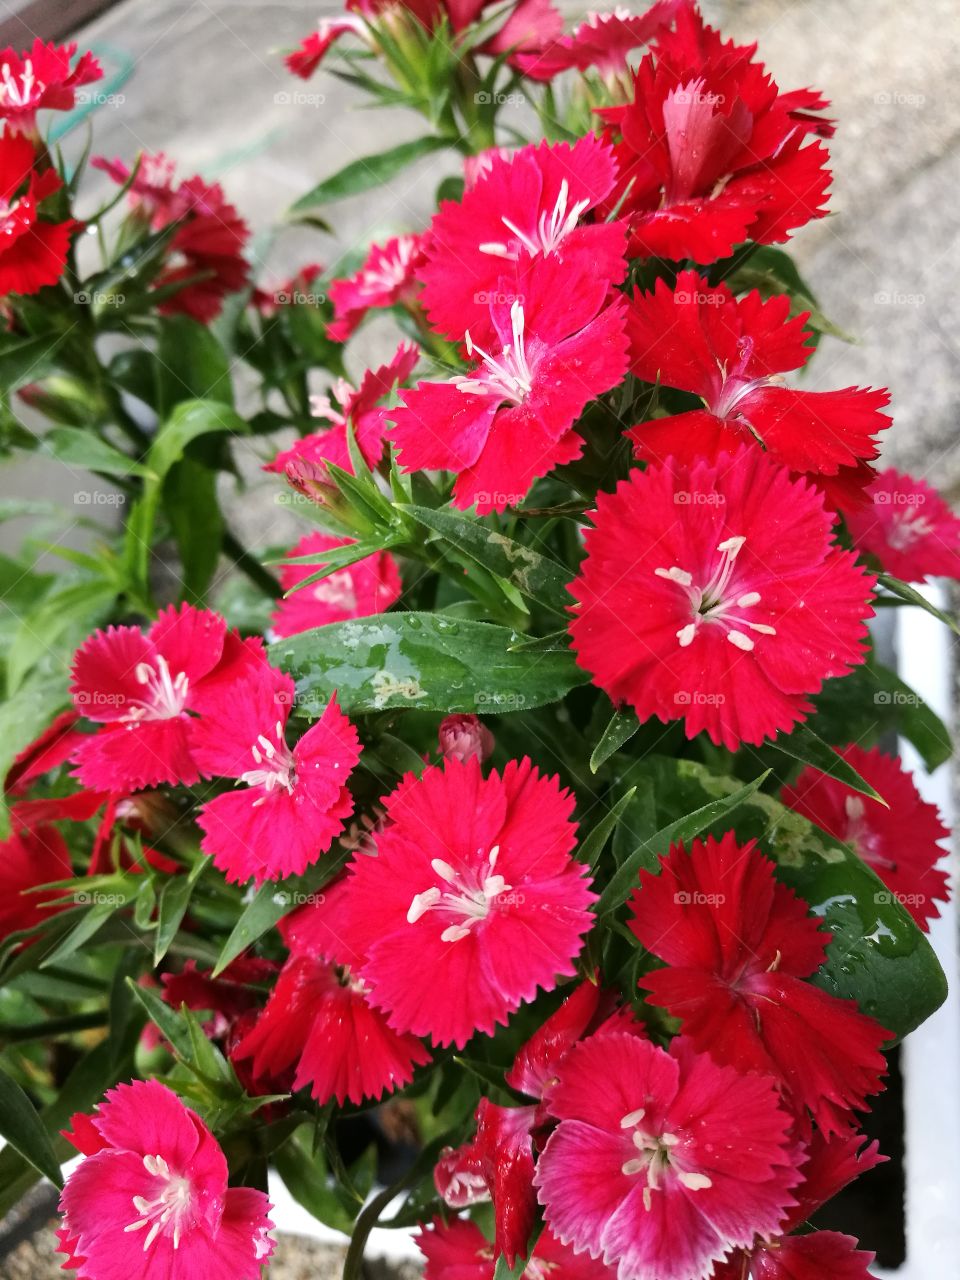 The blooming of dianthus with pretty red flowers.